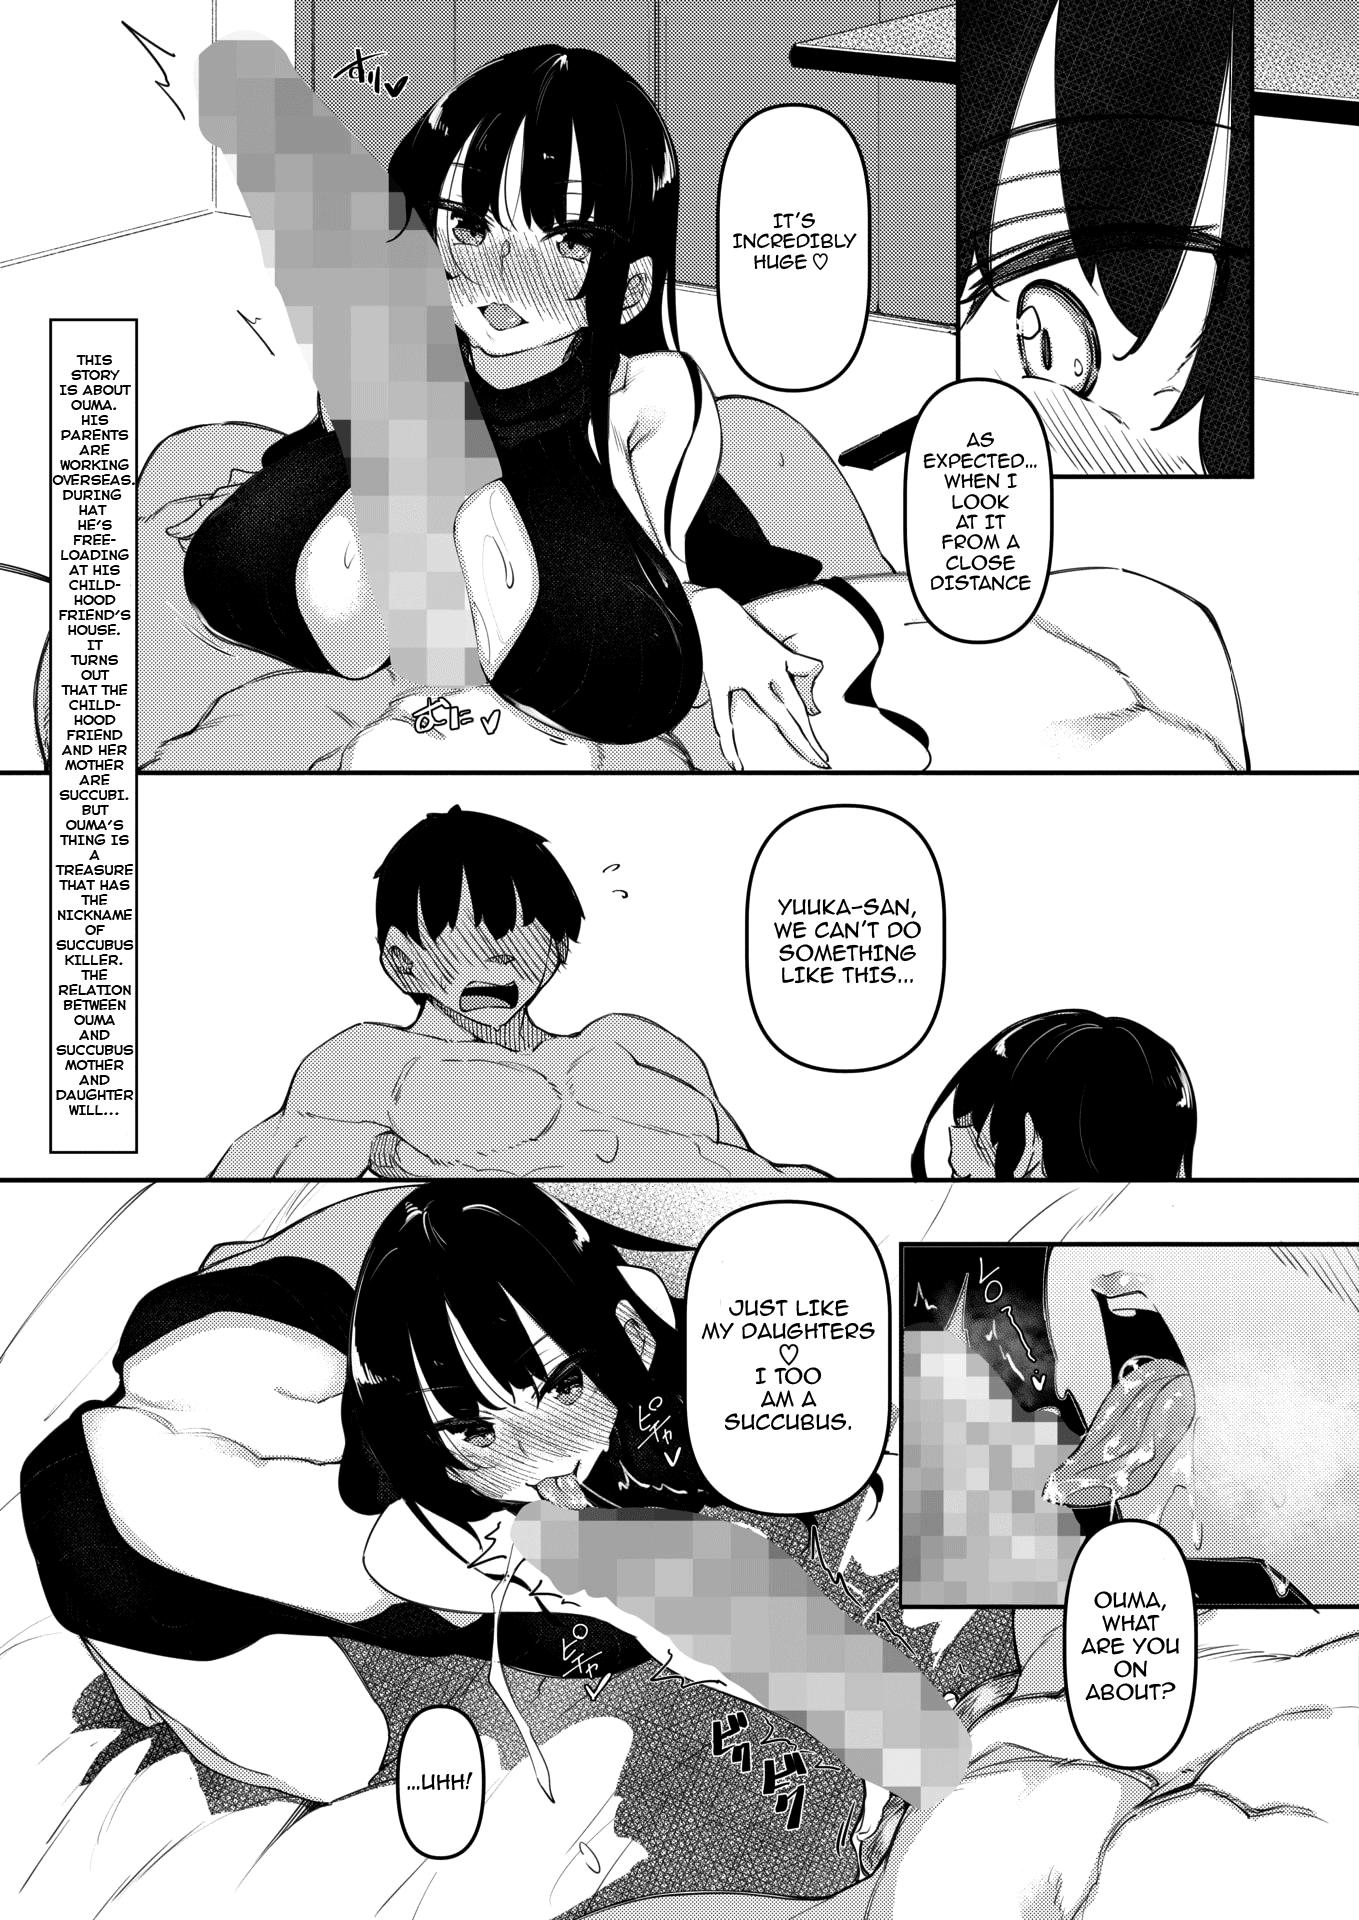 Little Succubutic Ch. 3 Young Tits - Page 3